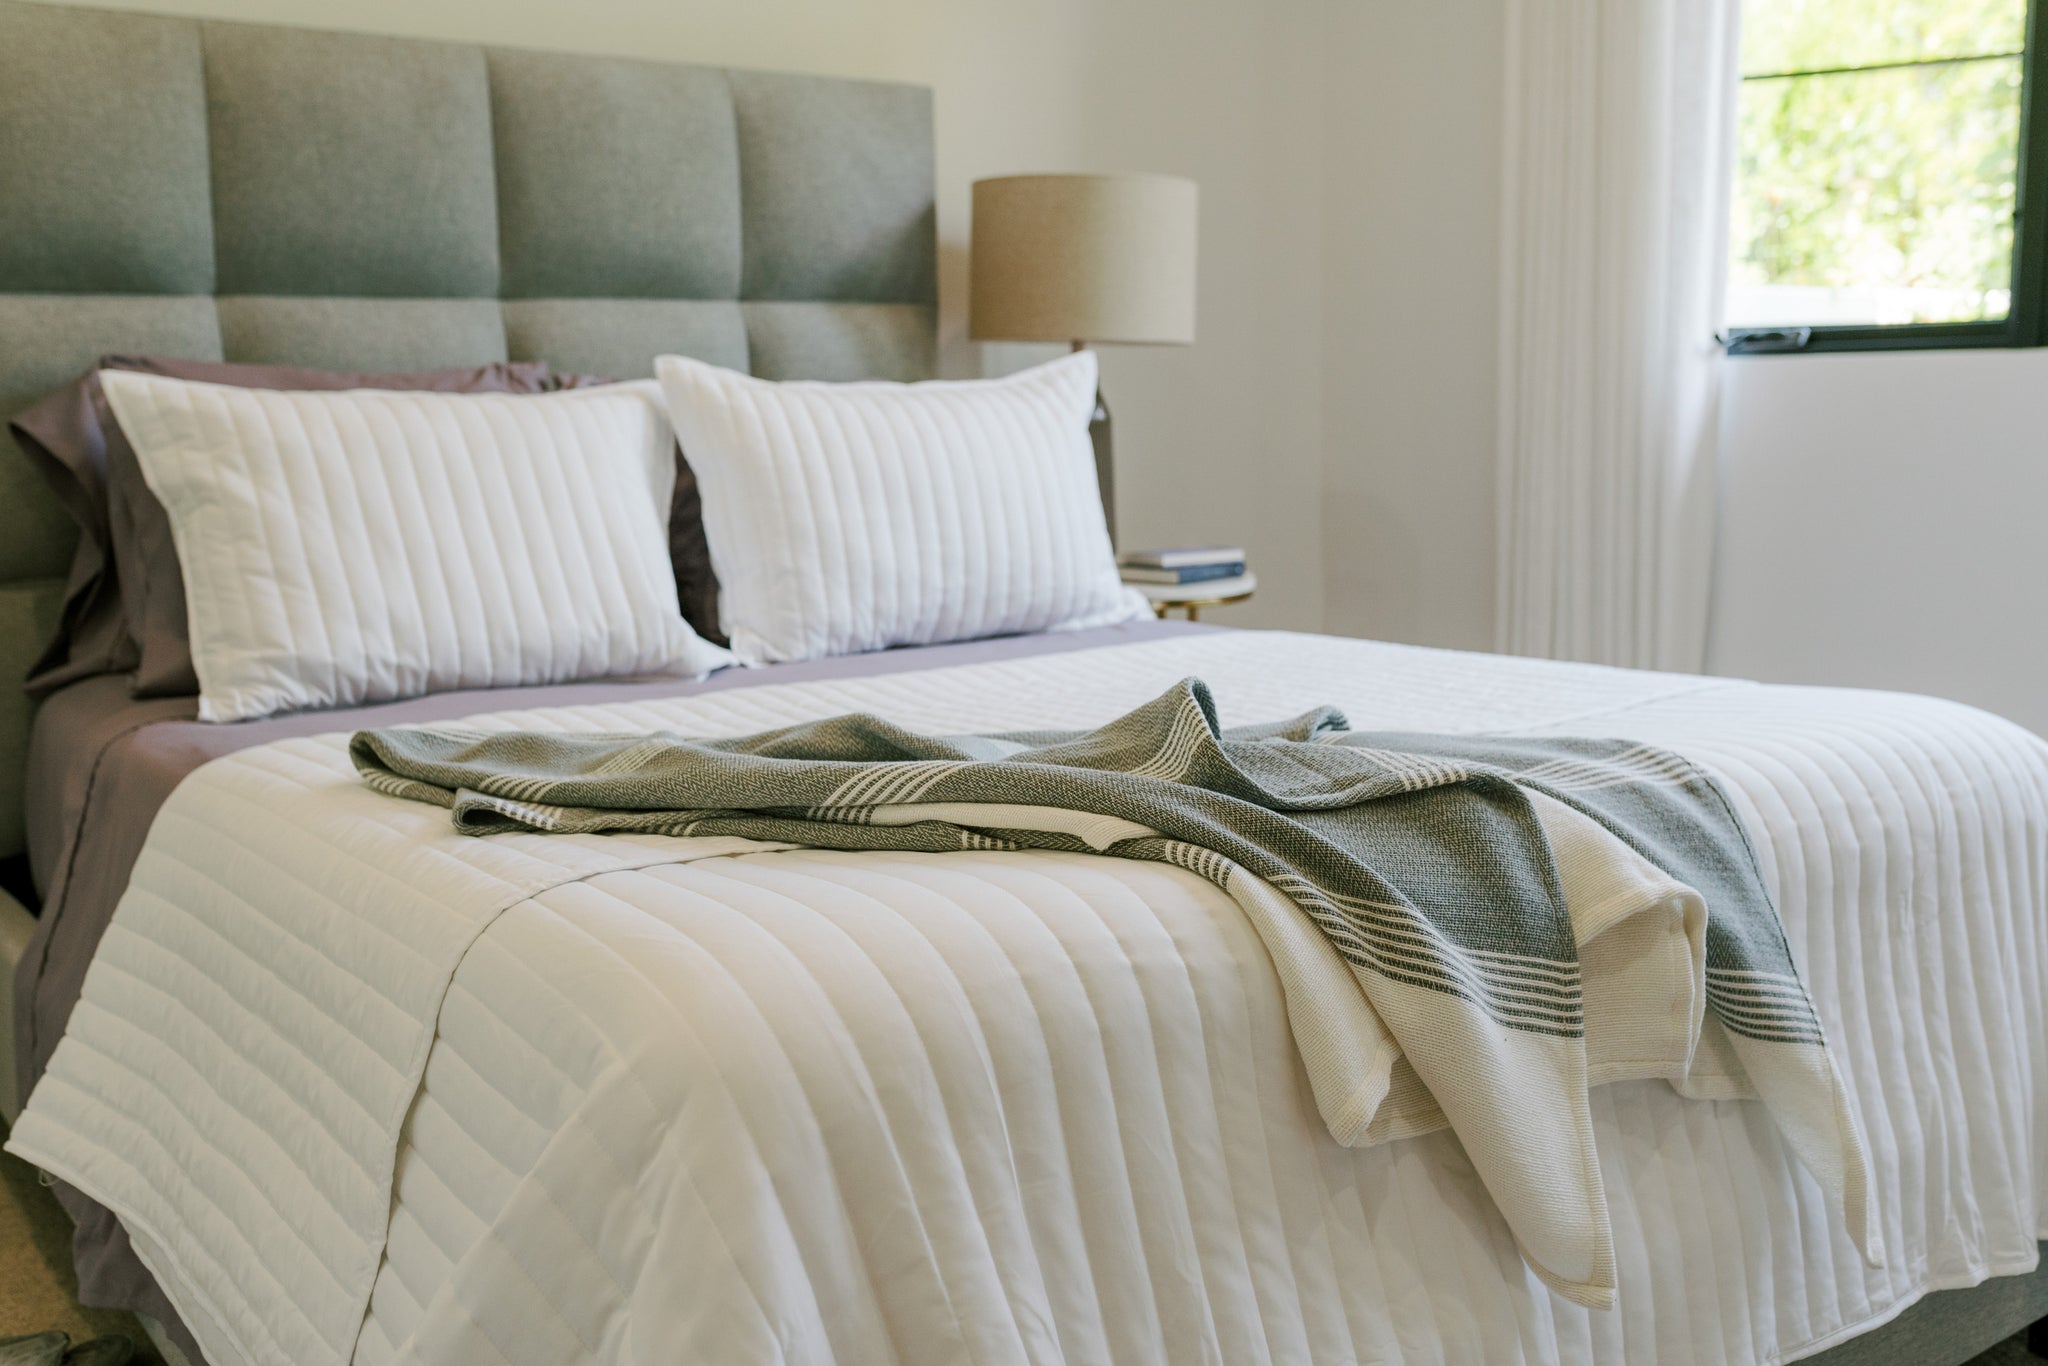 Look for bedding, blankets, and coverlets or duvets that complement your neutral color scheme